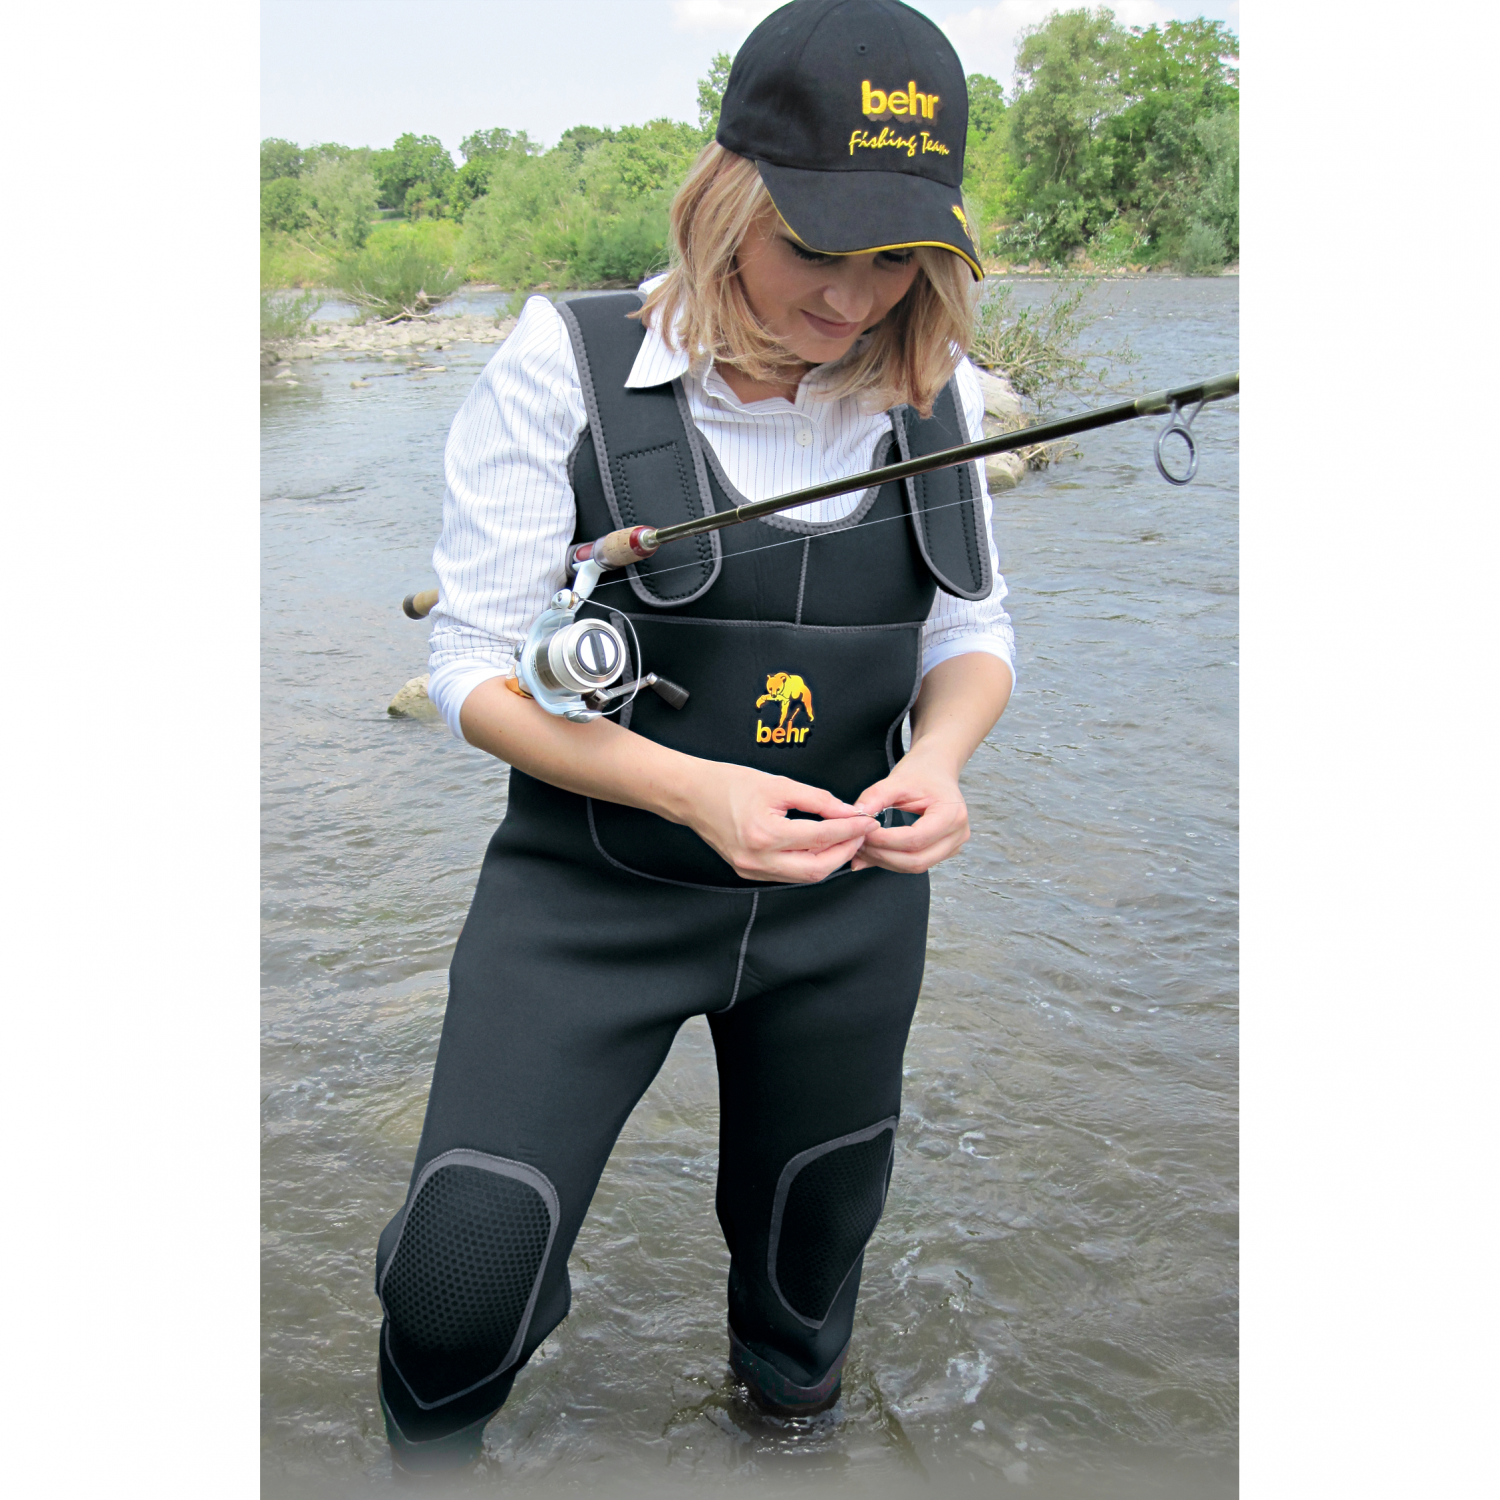 Behr Womens Neoprene Waders at low prices